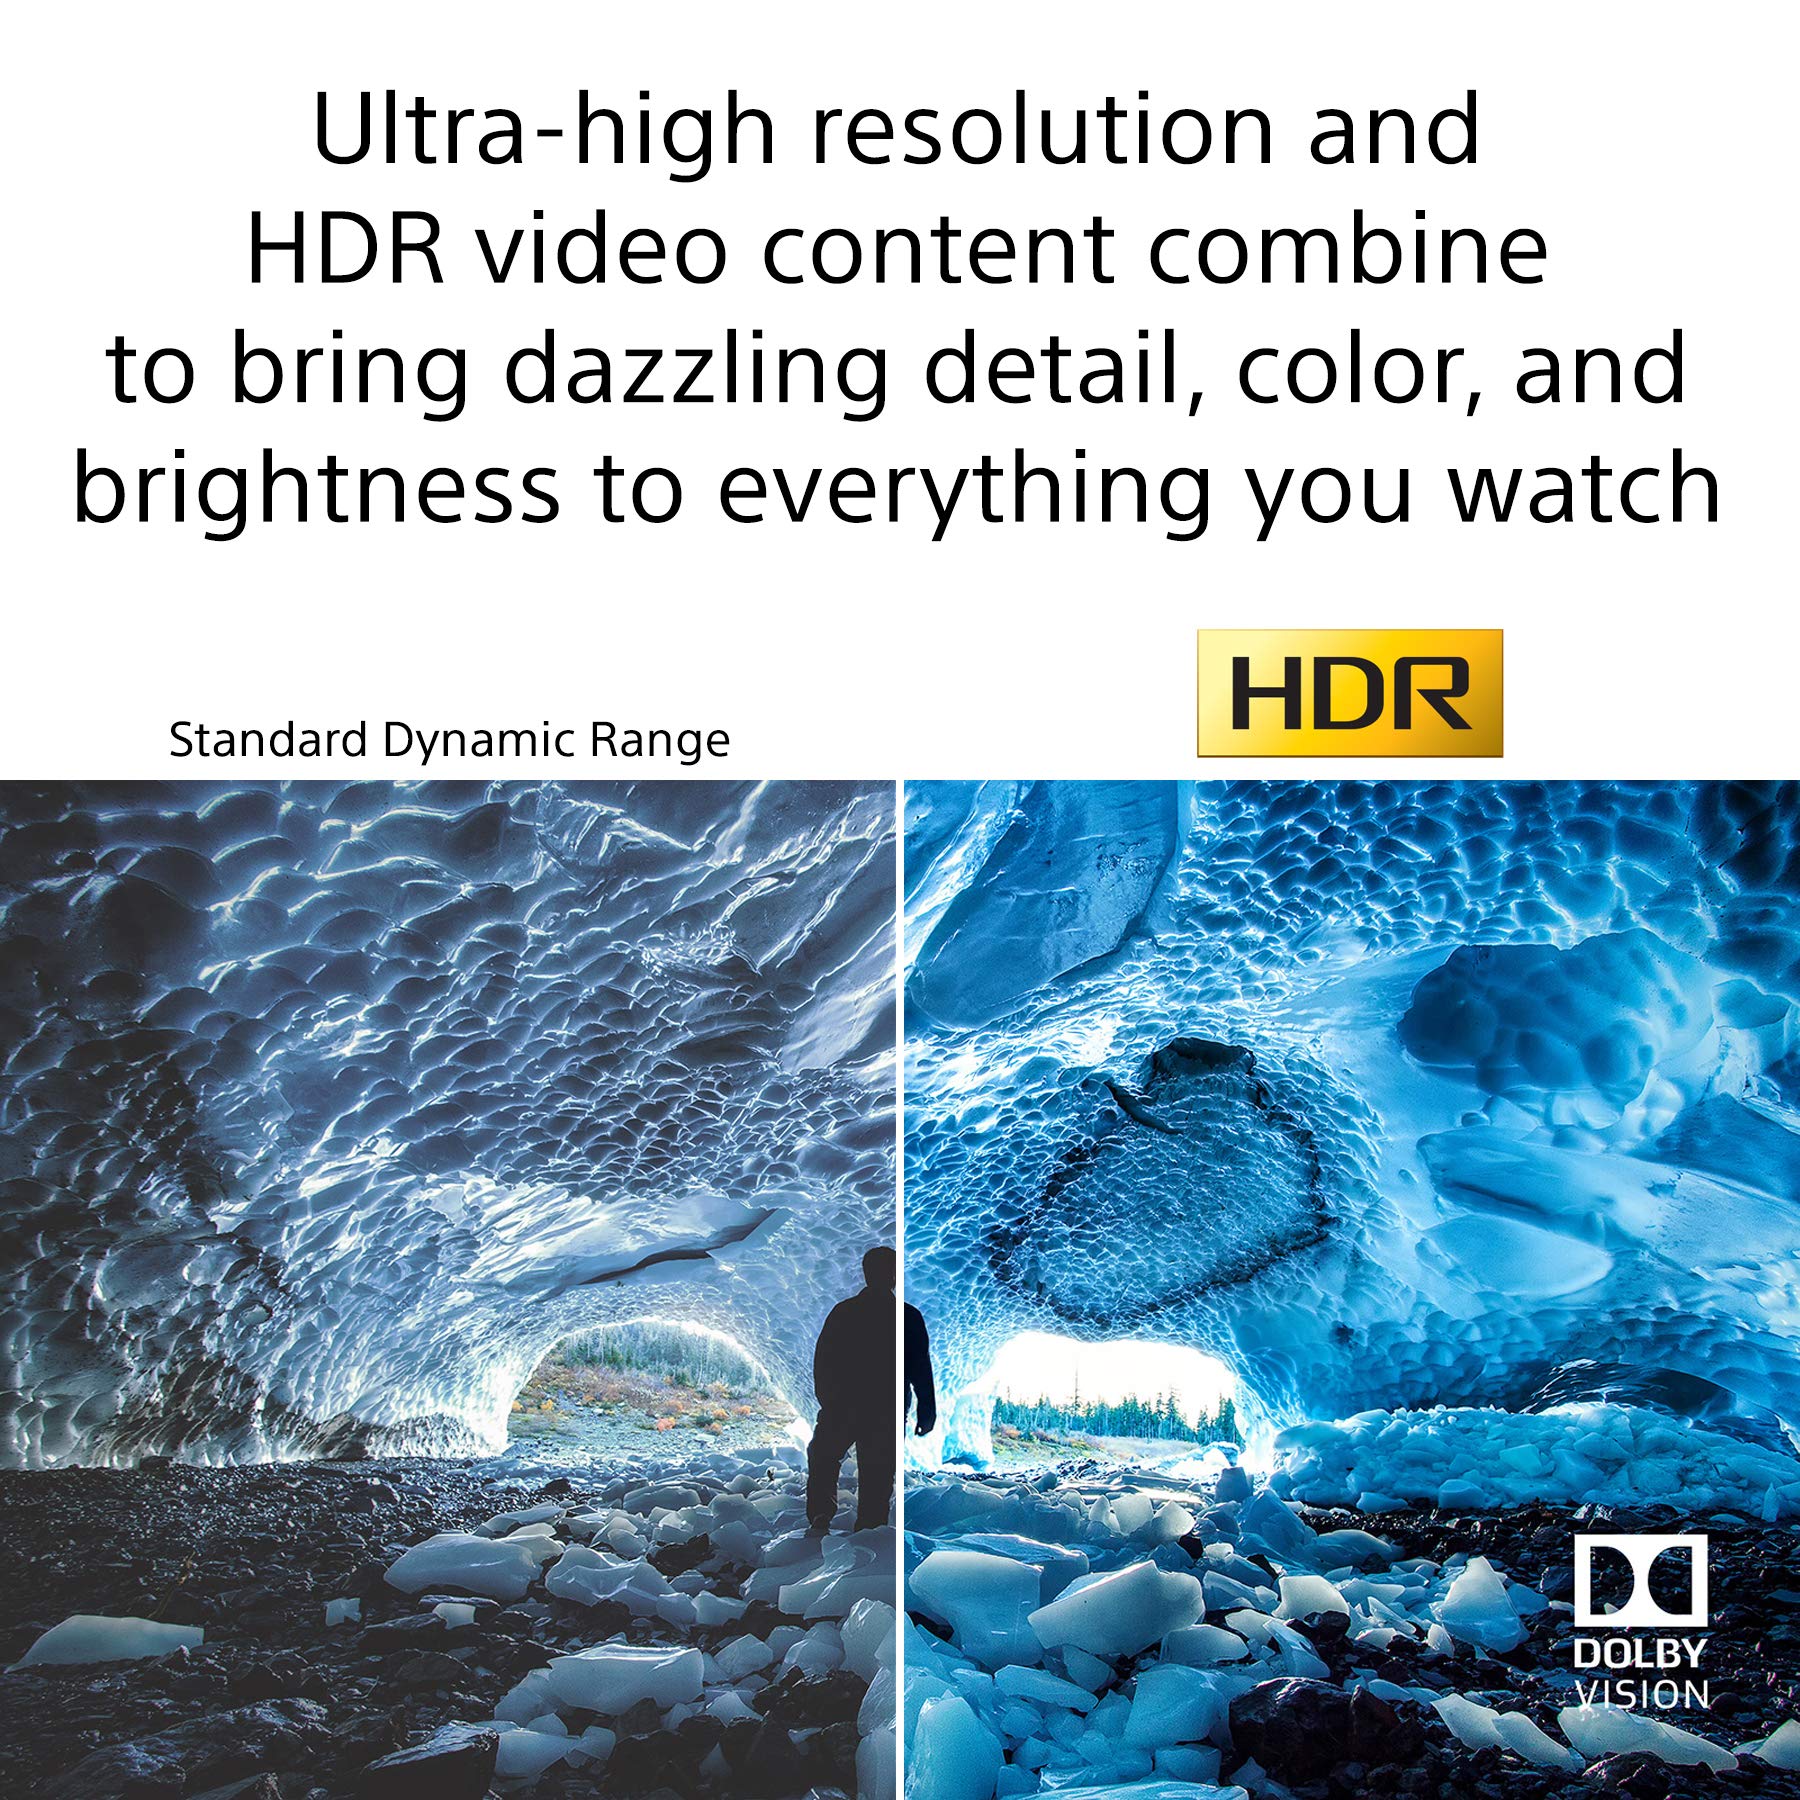 Sony X80J 55 Inch TV: 4K Ultra HD LED Smart Google TV with Dolby Vision HDR and Alexa Compatibility KD55X80J- 2021 Model